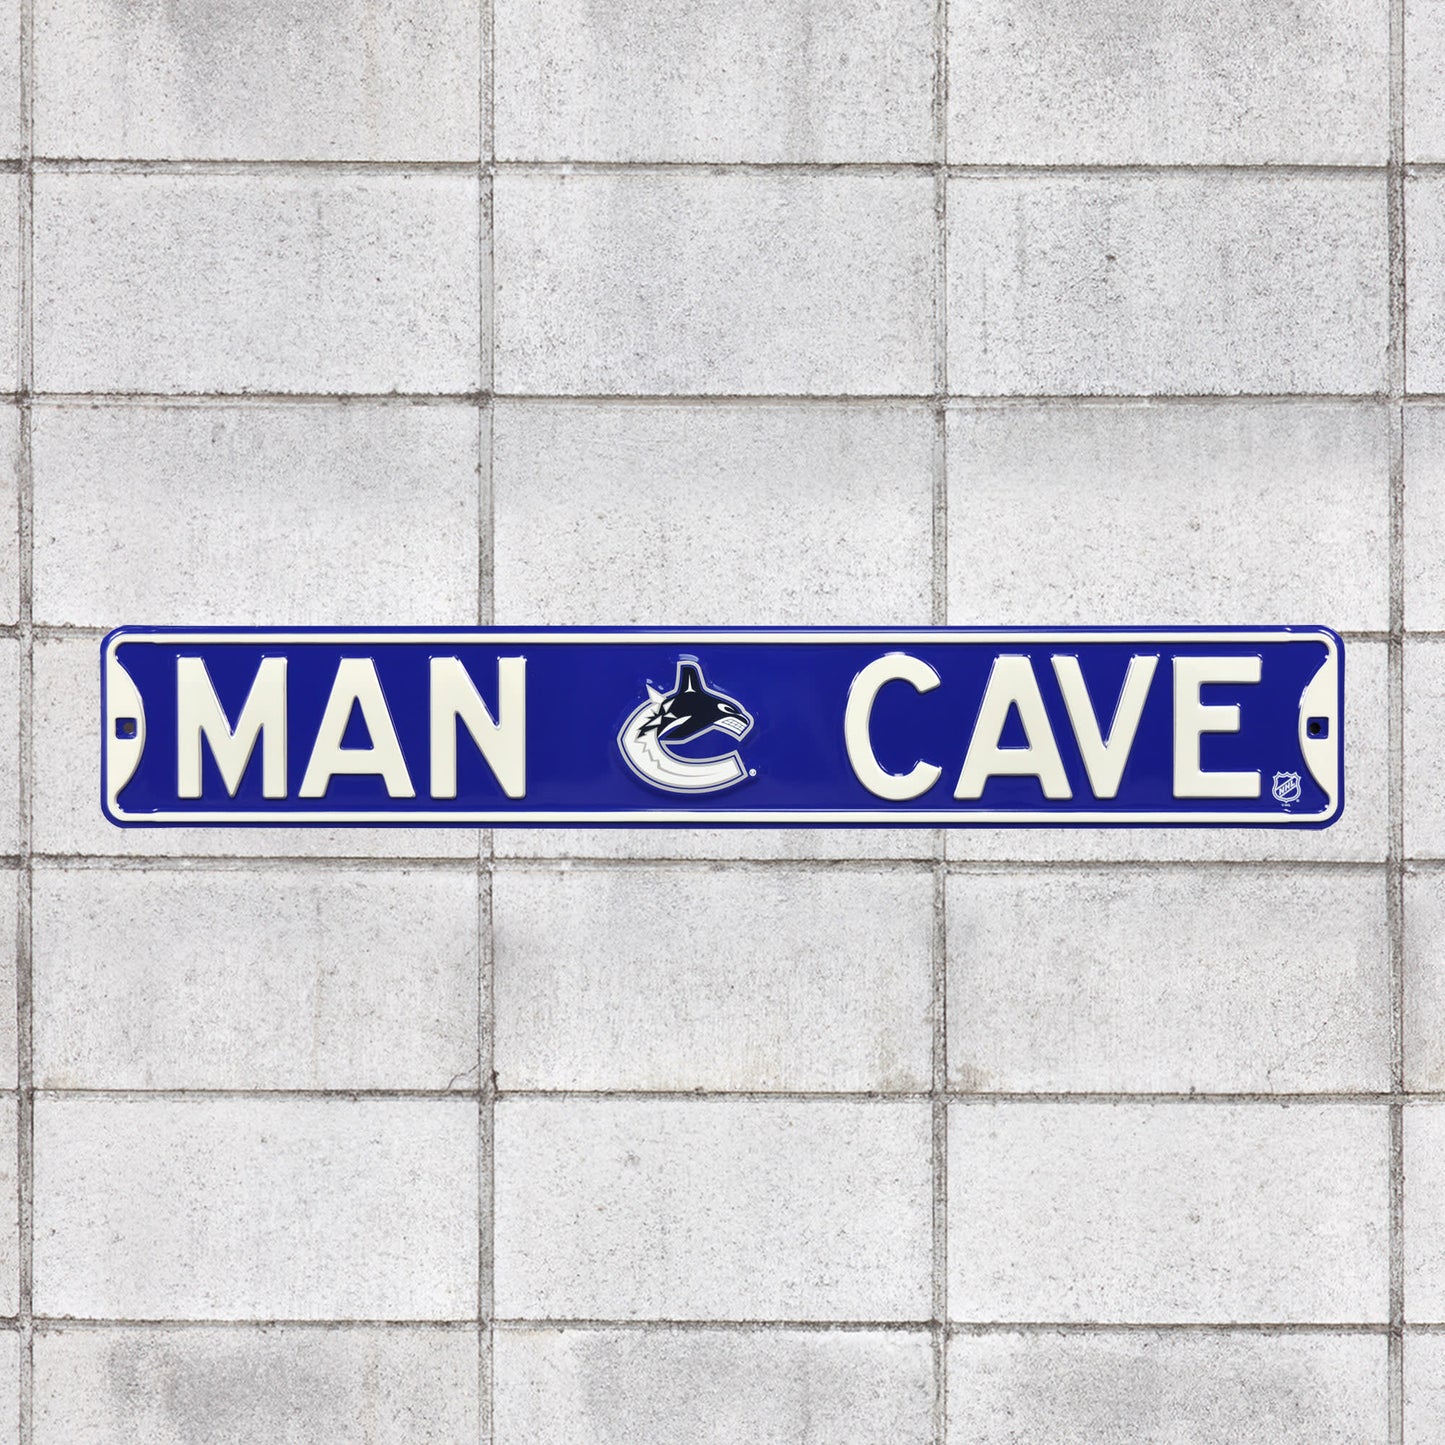 Vancouver Canucks: Man Cave - Officially Licensed NHL Metal Street Sign